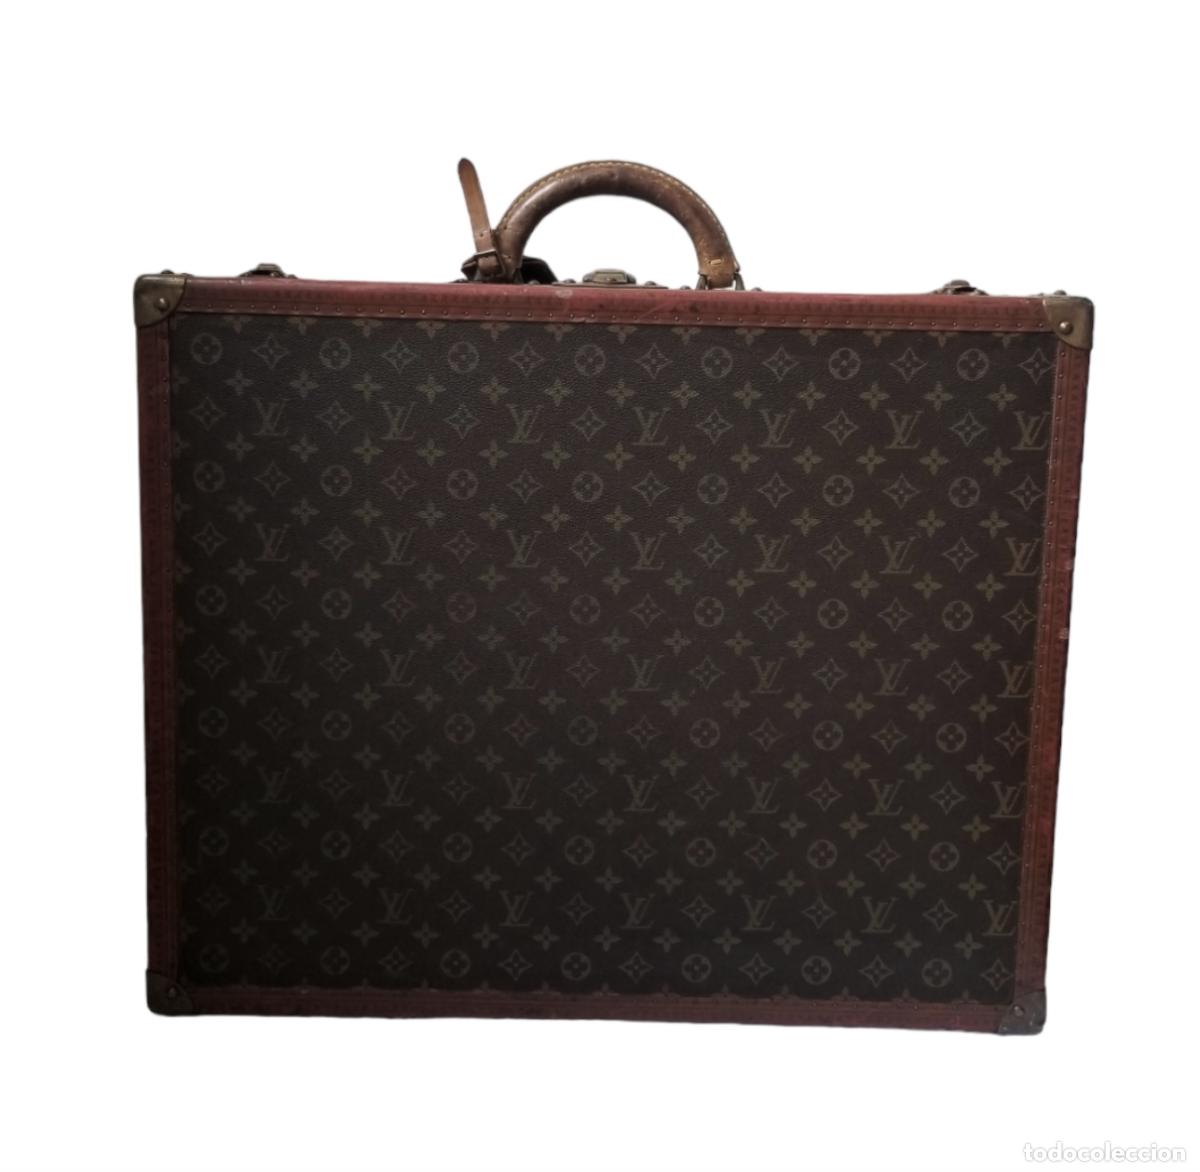 maleta louis vuitton vintage - Buy Other vintage objects on todocoleccion